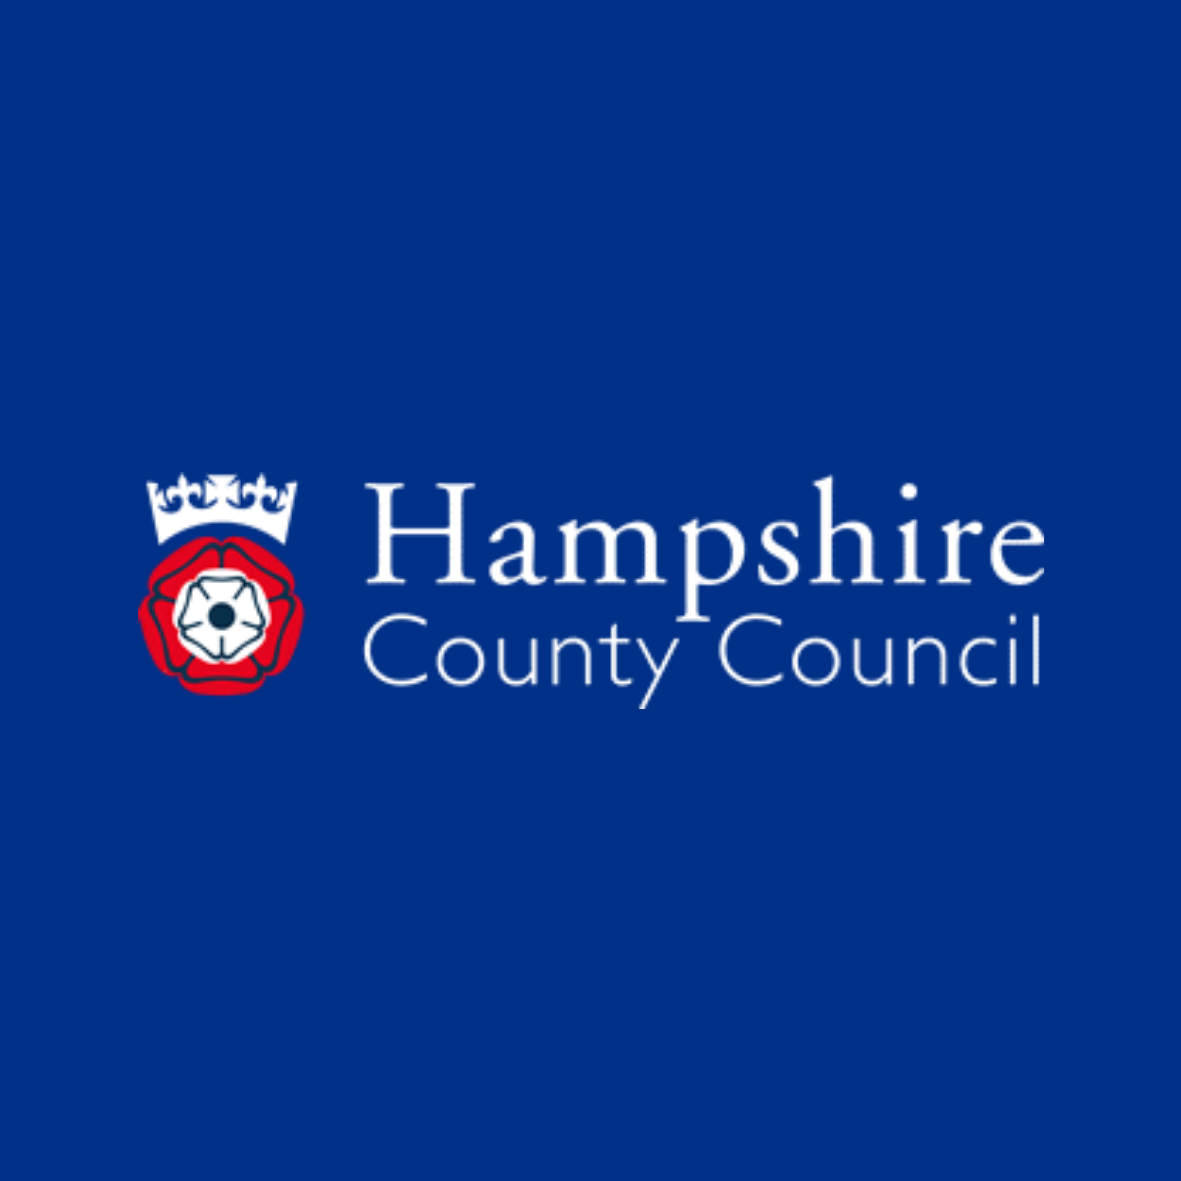 Logo for Hampshire County Council